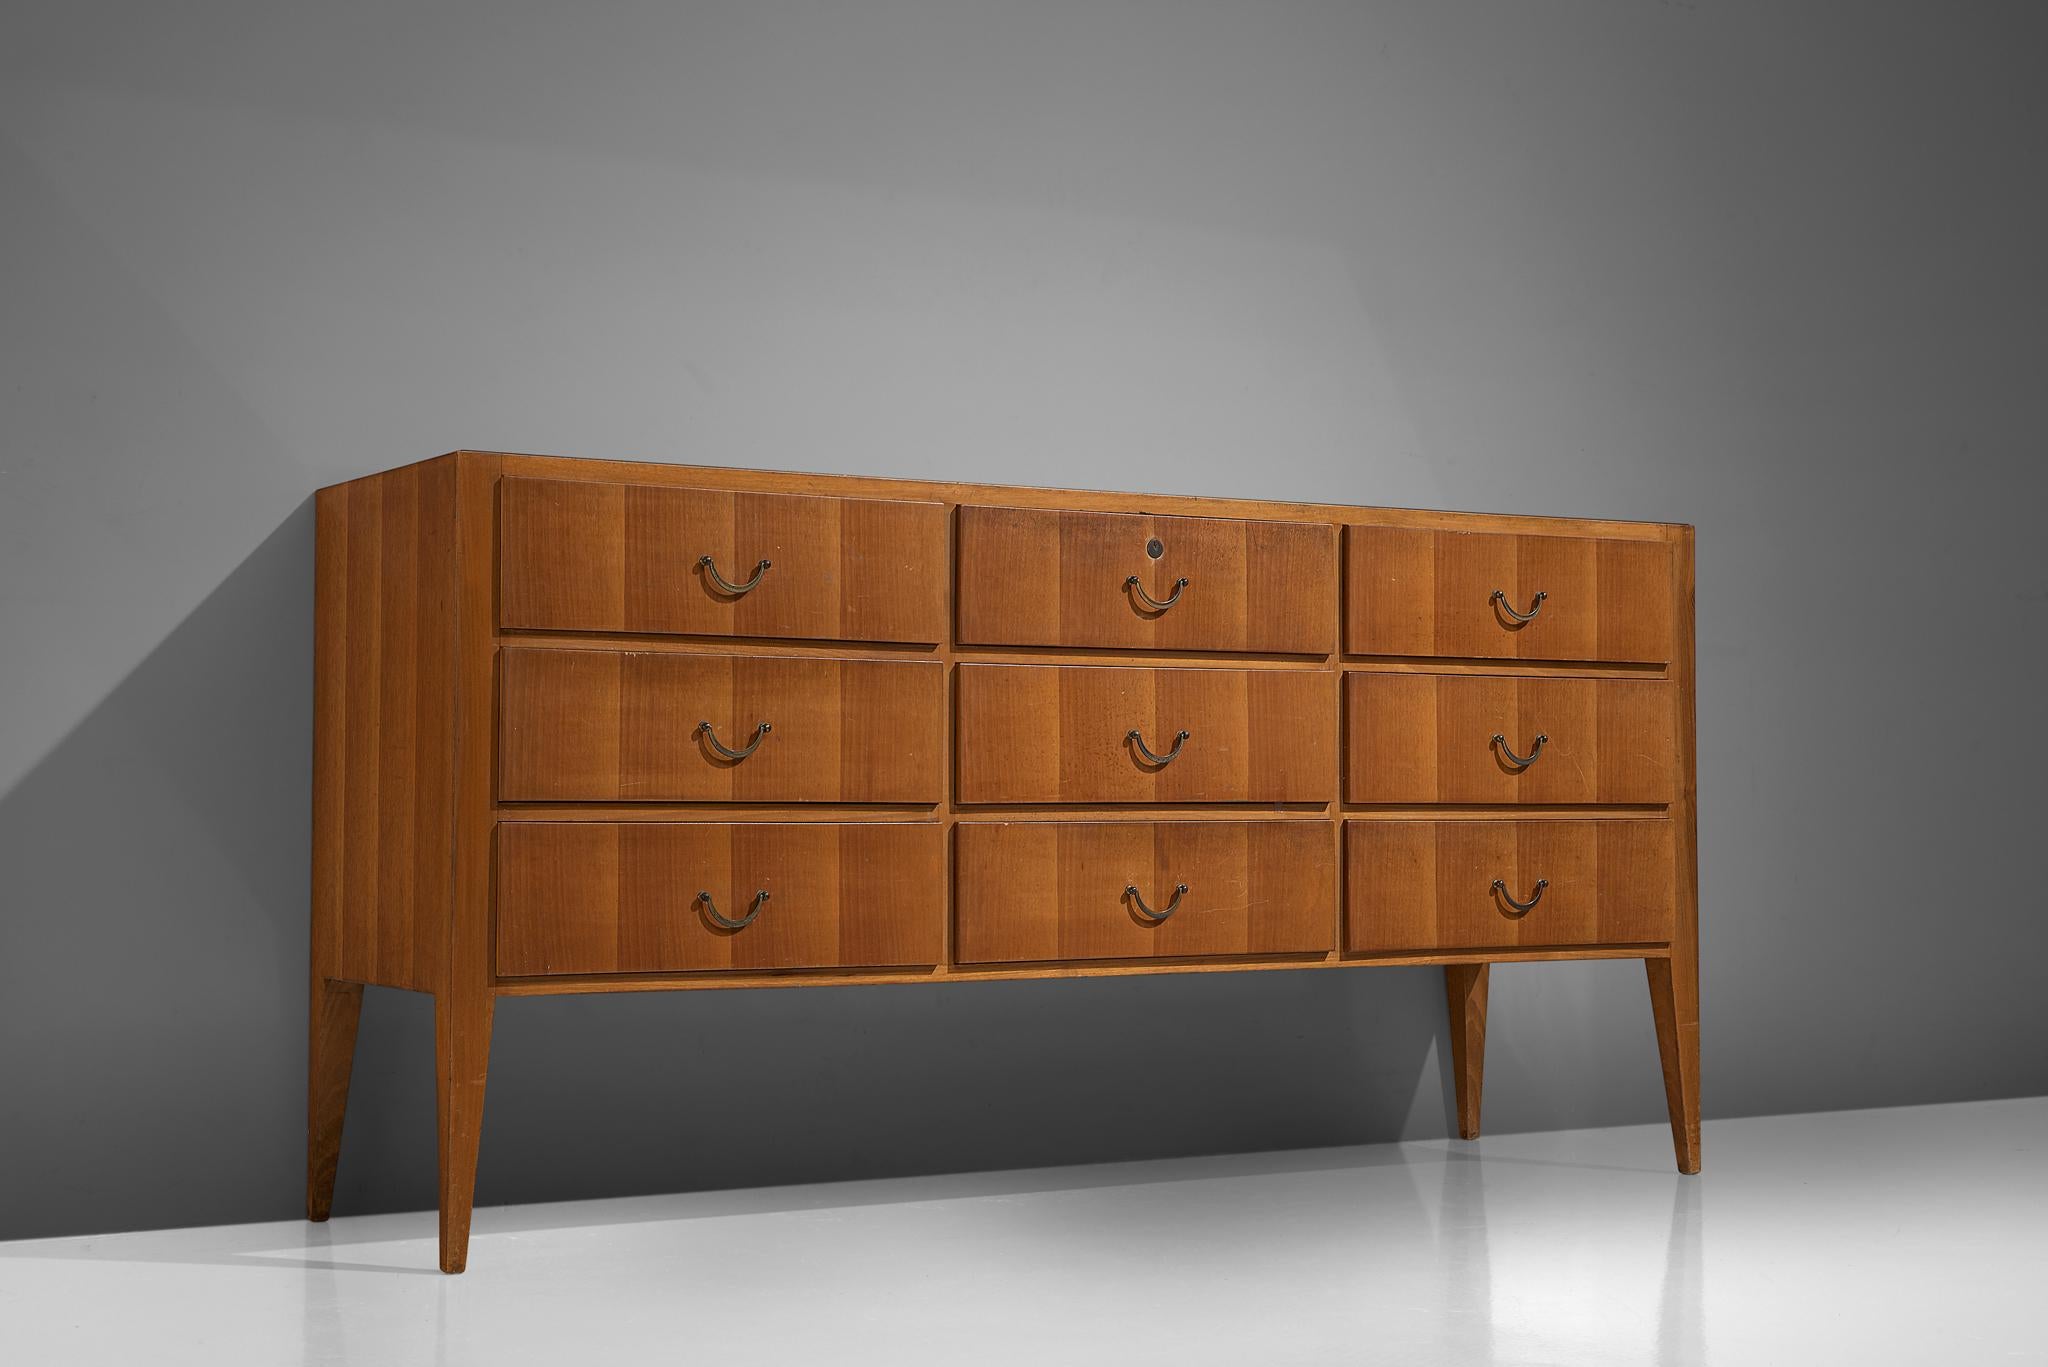 Credenza, Italian walnut, glass, brass, Italy, circa 1950.

This sideboard is both refined and elegant in every way. The beautifully book matched walnut of the drawers are finished with brass handles. The glass top is inlayed in the very well